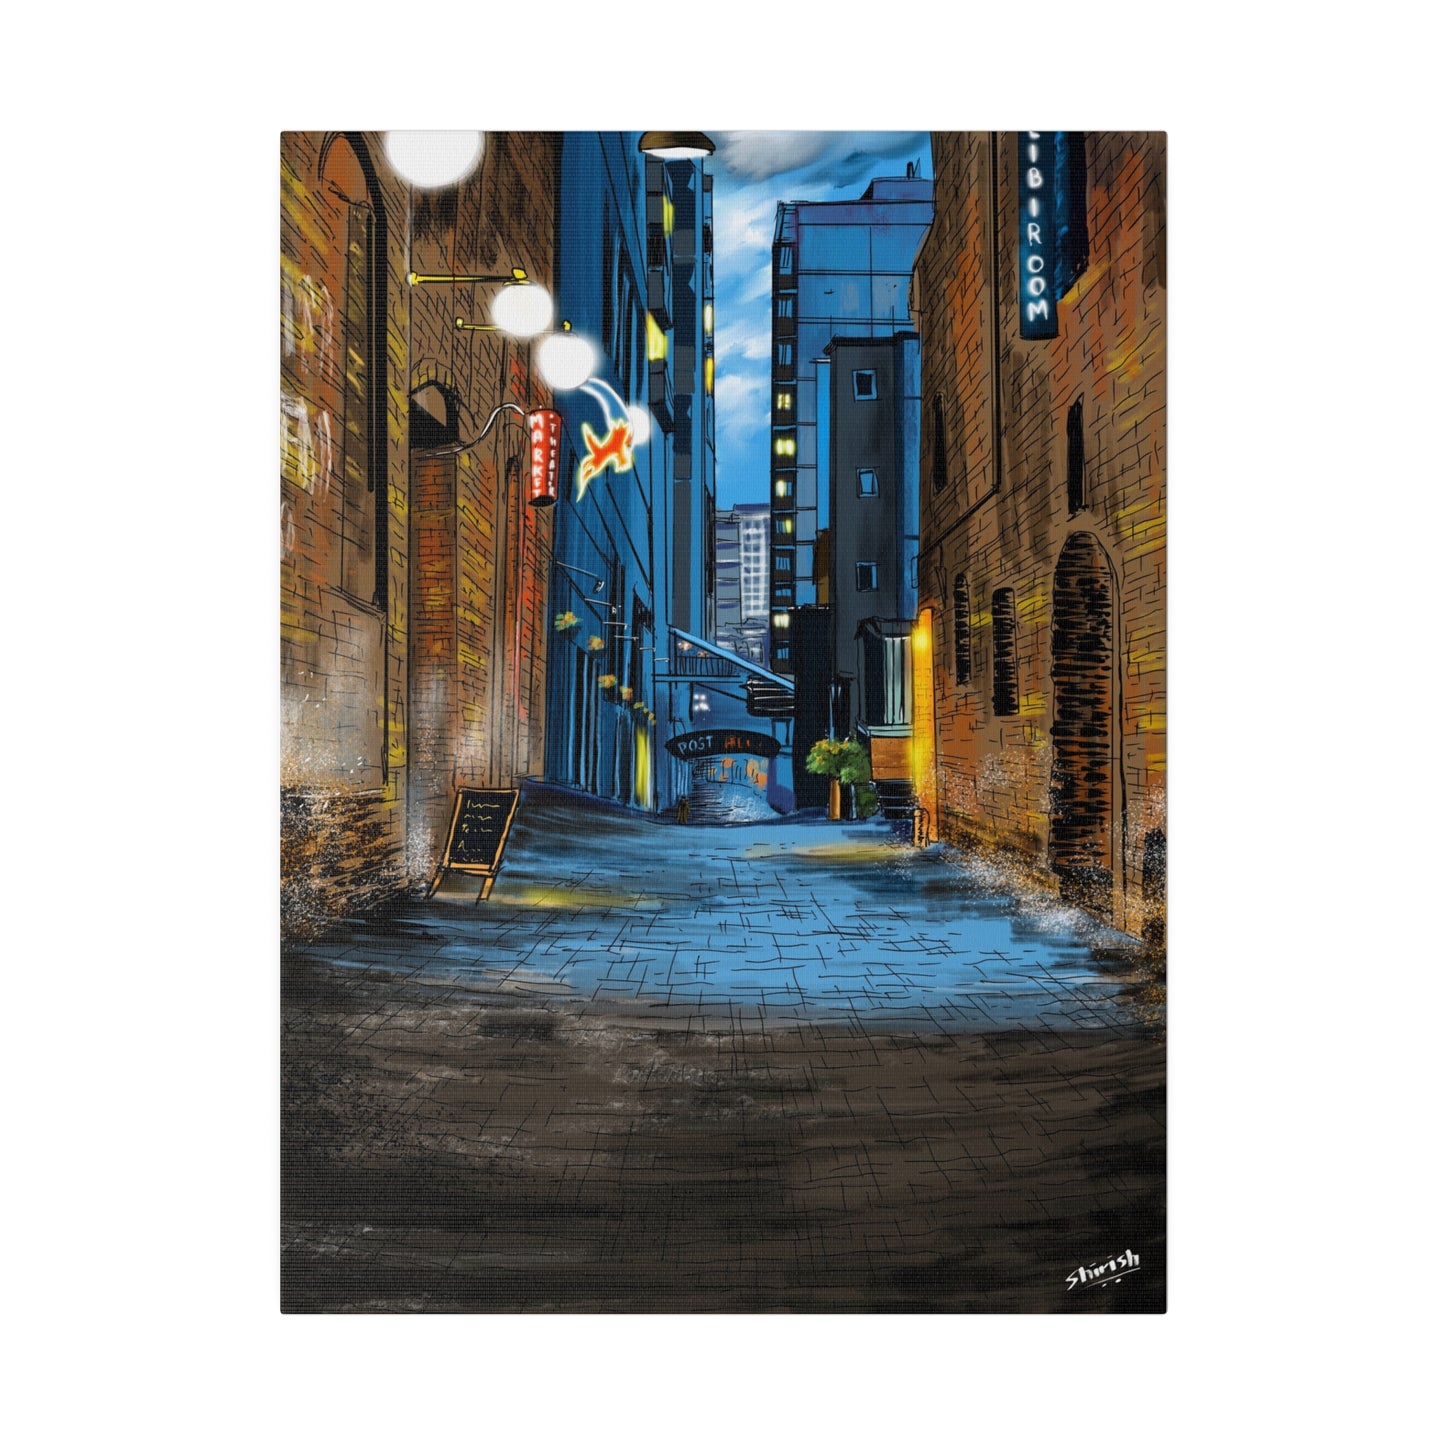 A Quiet Lane in a Busy City - Canvas Print